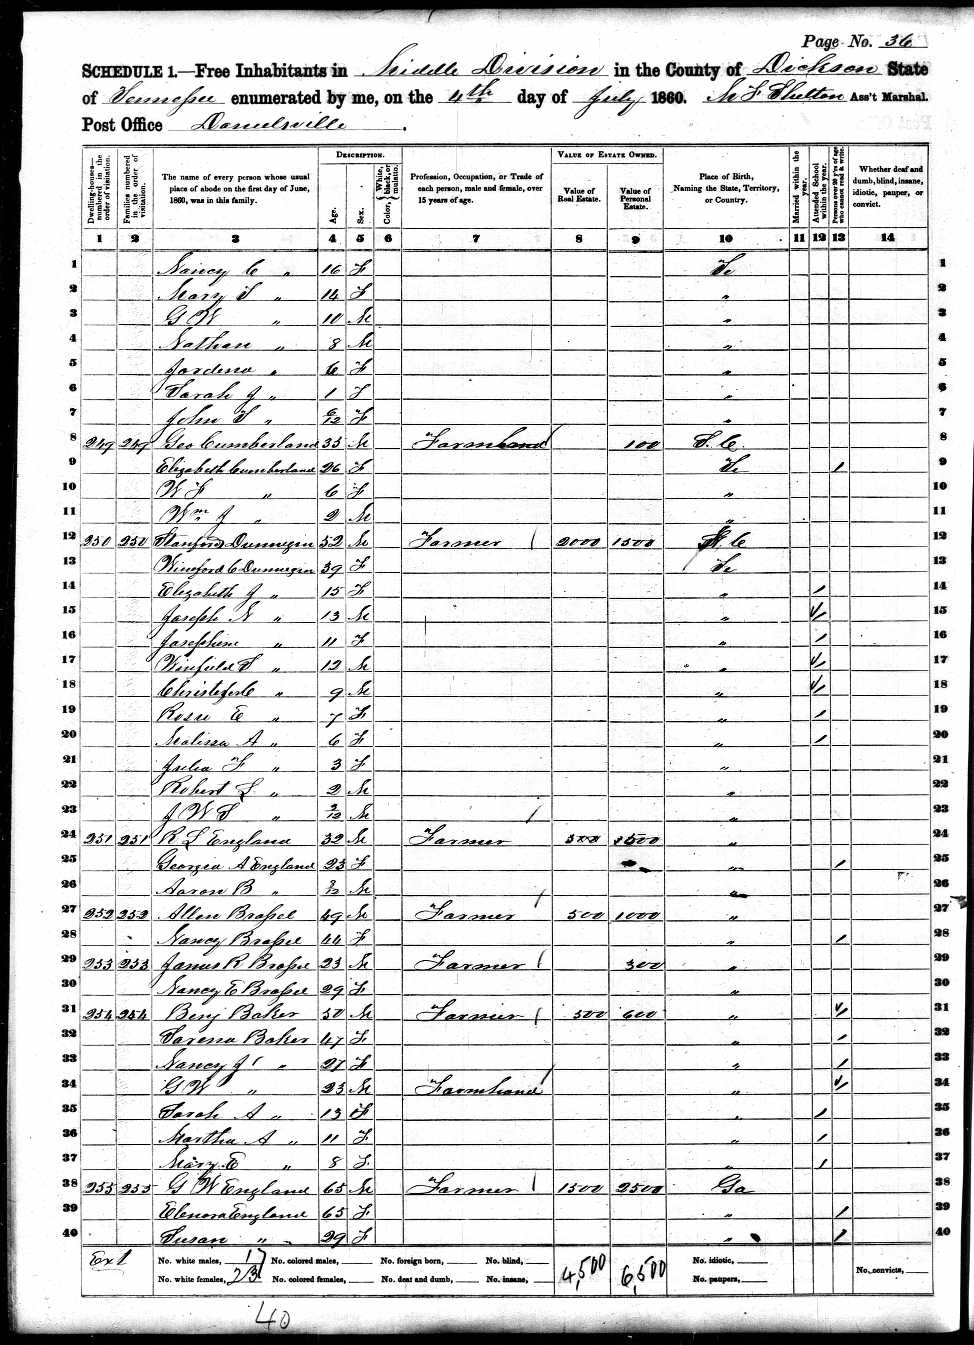 Allen Brazzell, 1860 Dickson County, Tennessee, census